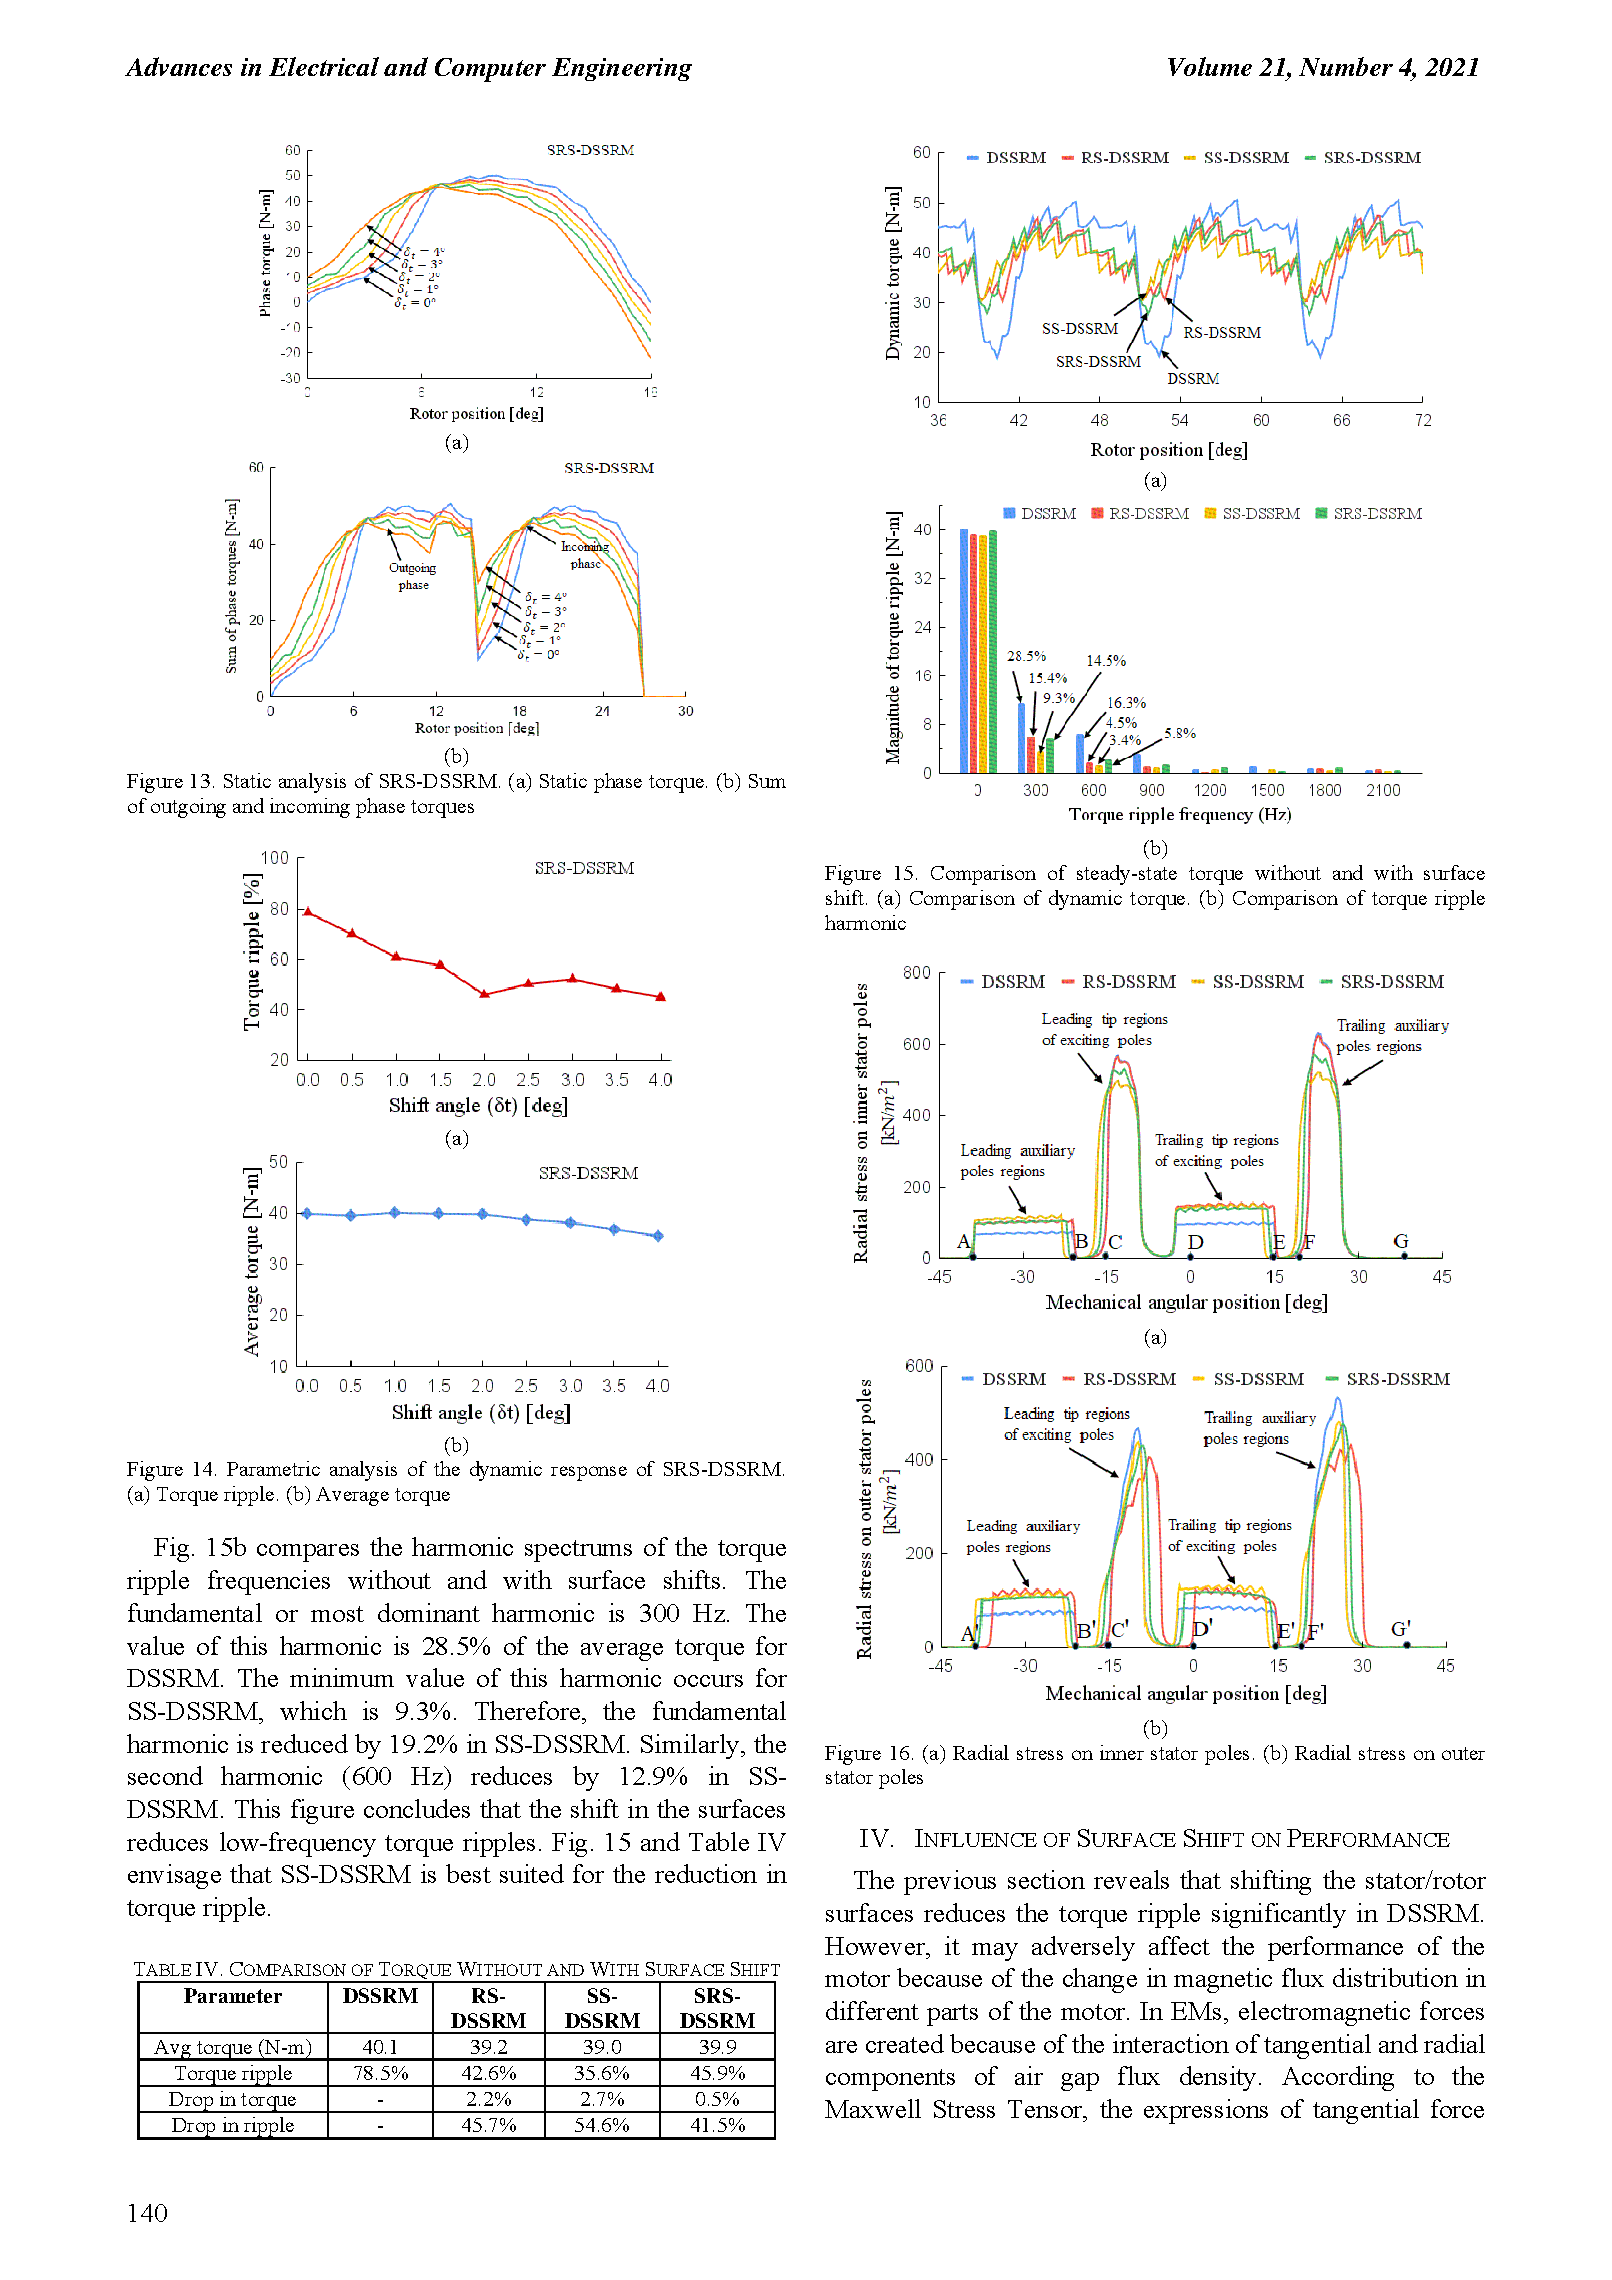 PDF Quickview for paper with DOI:10.4316/AECE.2021.04015